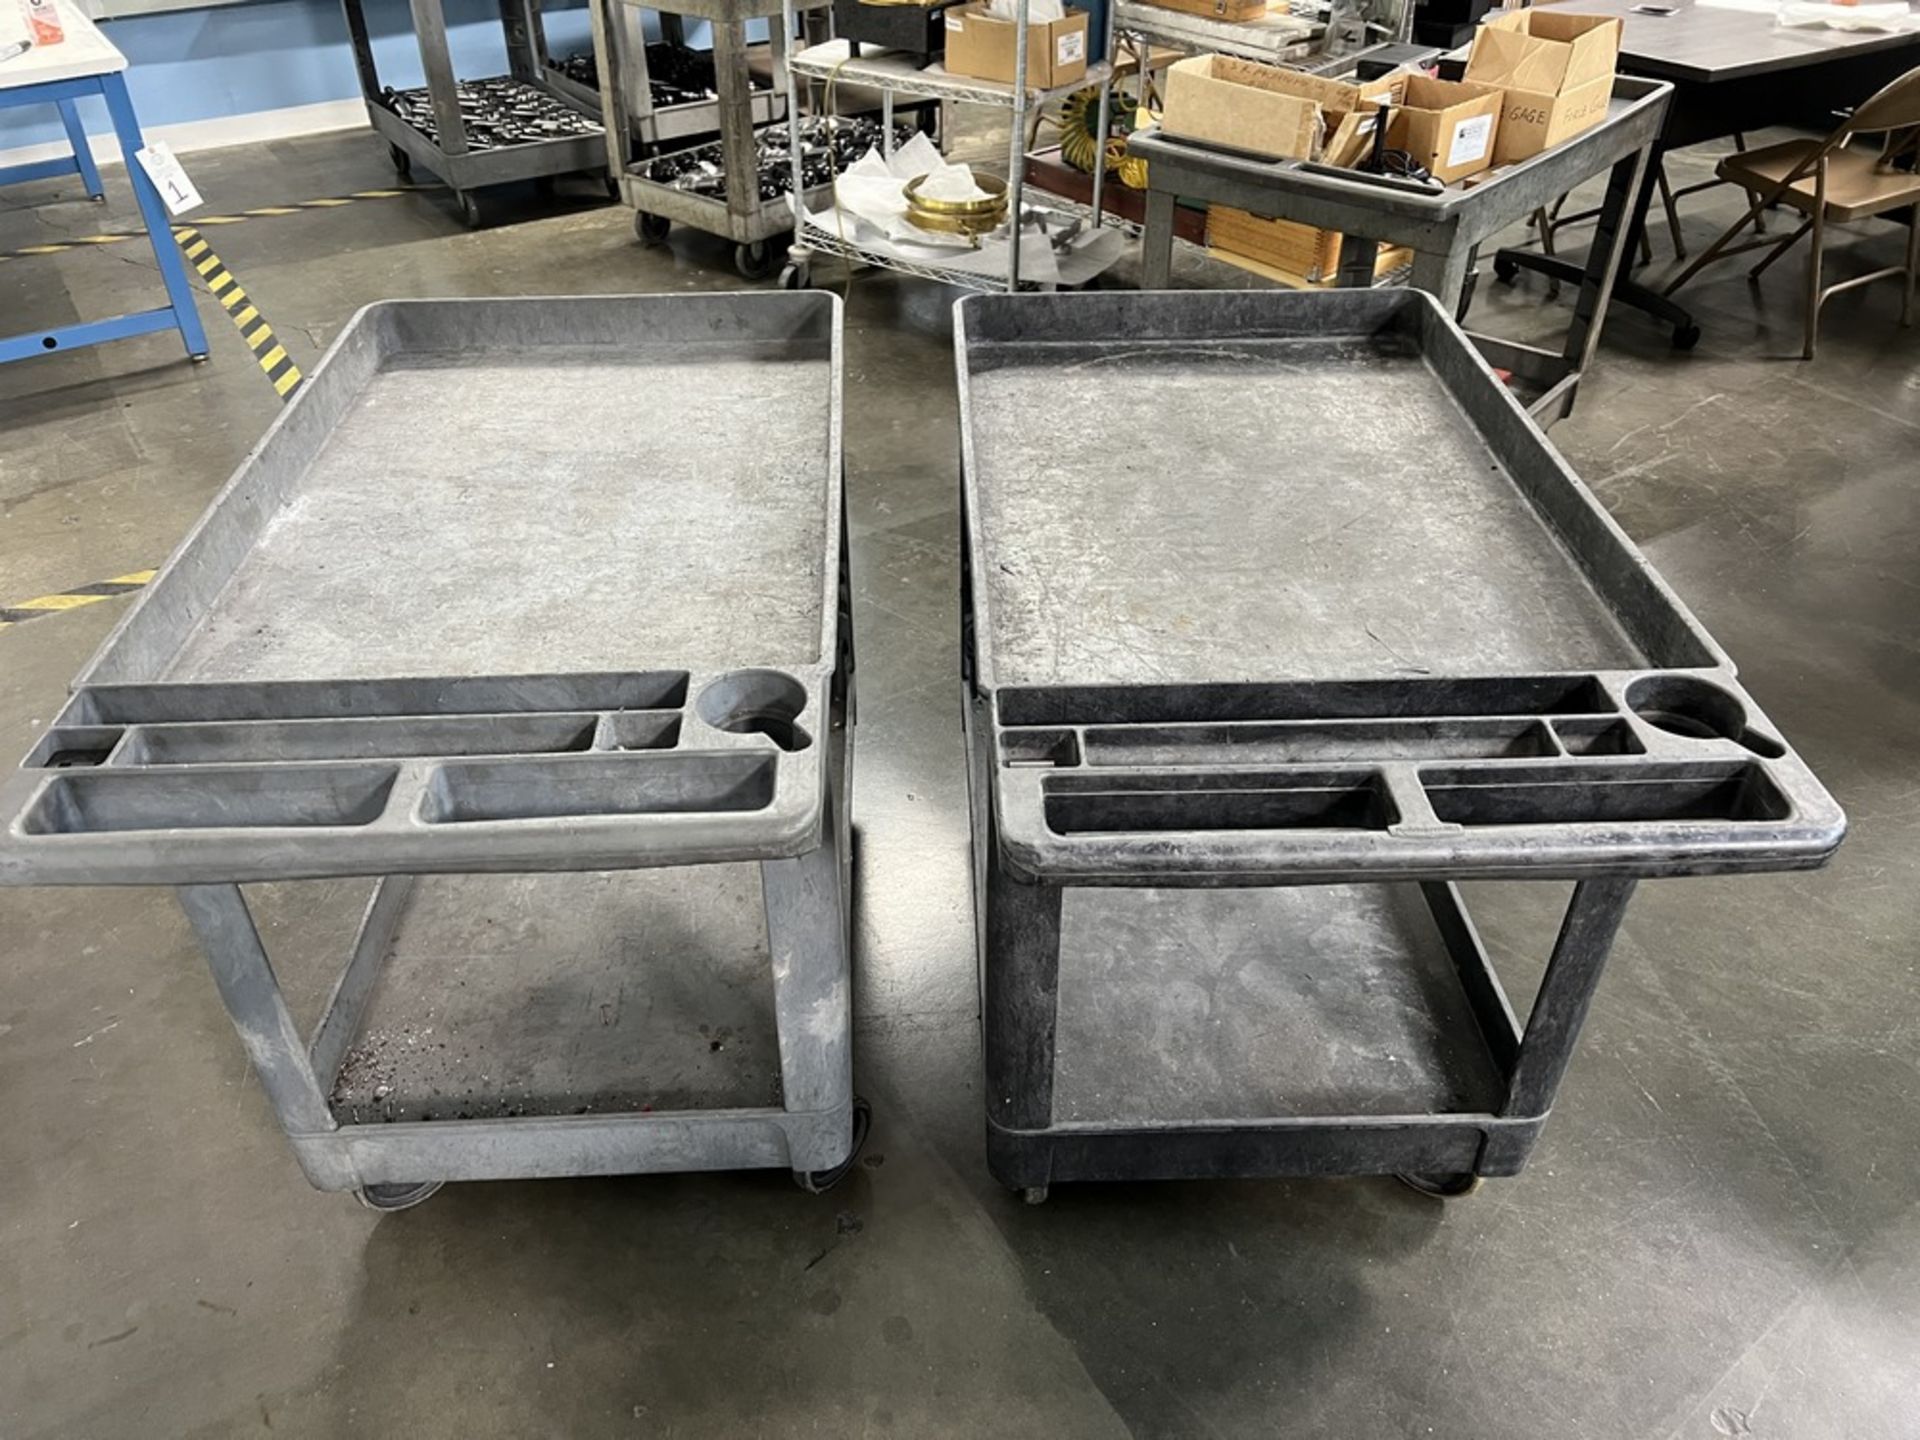 (2) Rubbermaid Shop Carts - Image 4 of 4